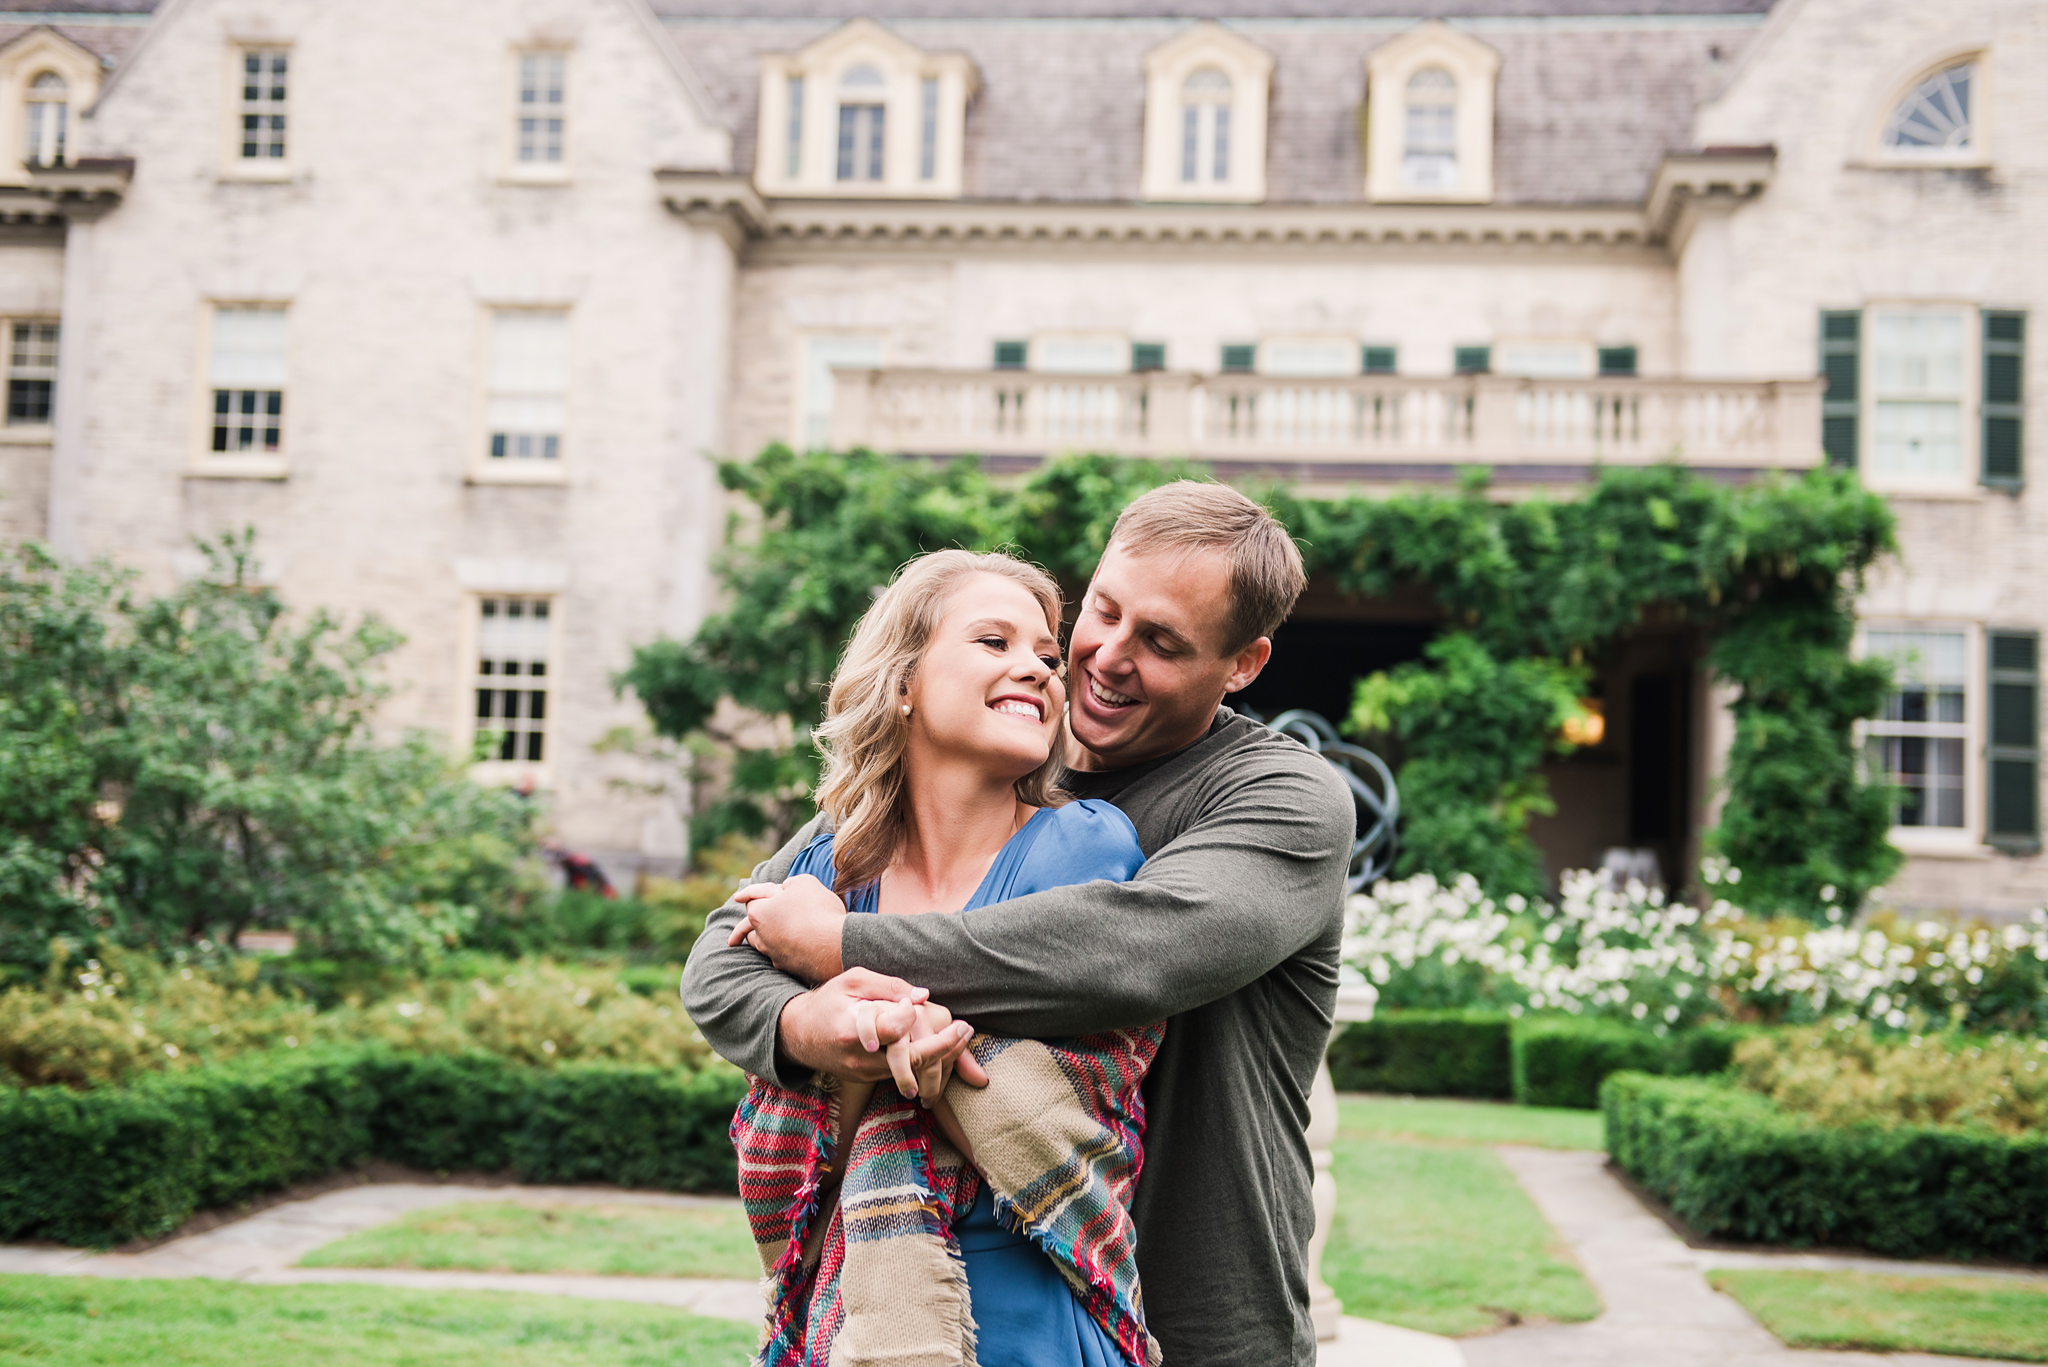 George_Eastman_House_Rochester_Yacht_Club_Rochester_Engagement_Session_JILL_STUDIO_Rochester_NY_Photographer_DSC_8009.jpg